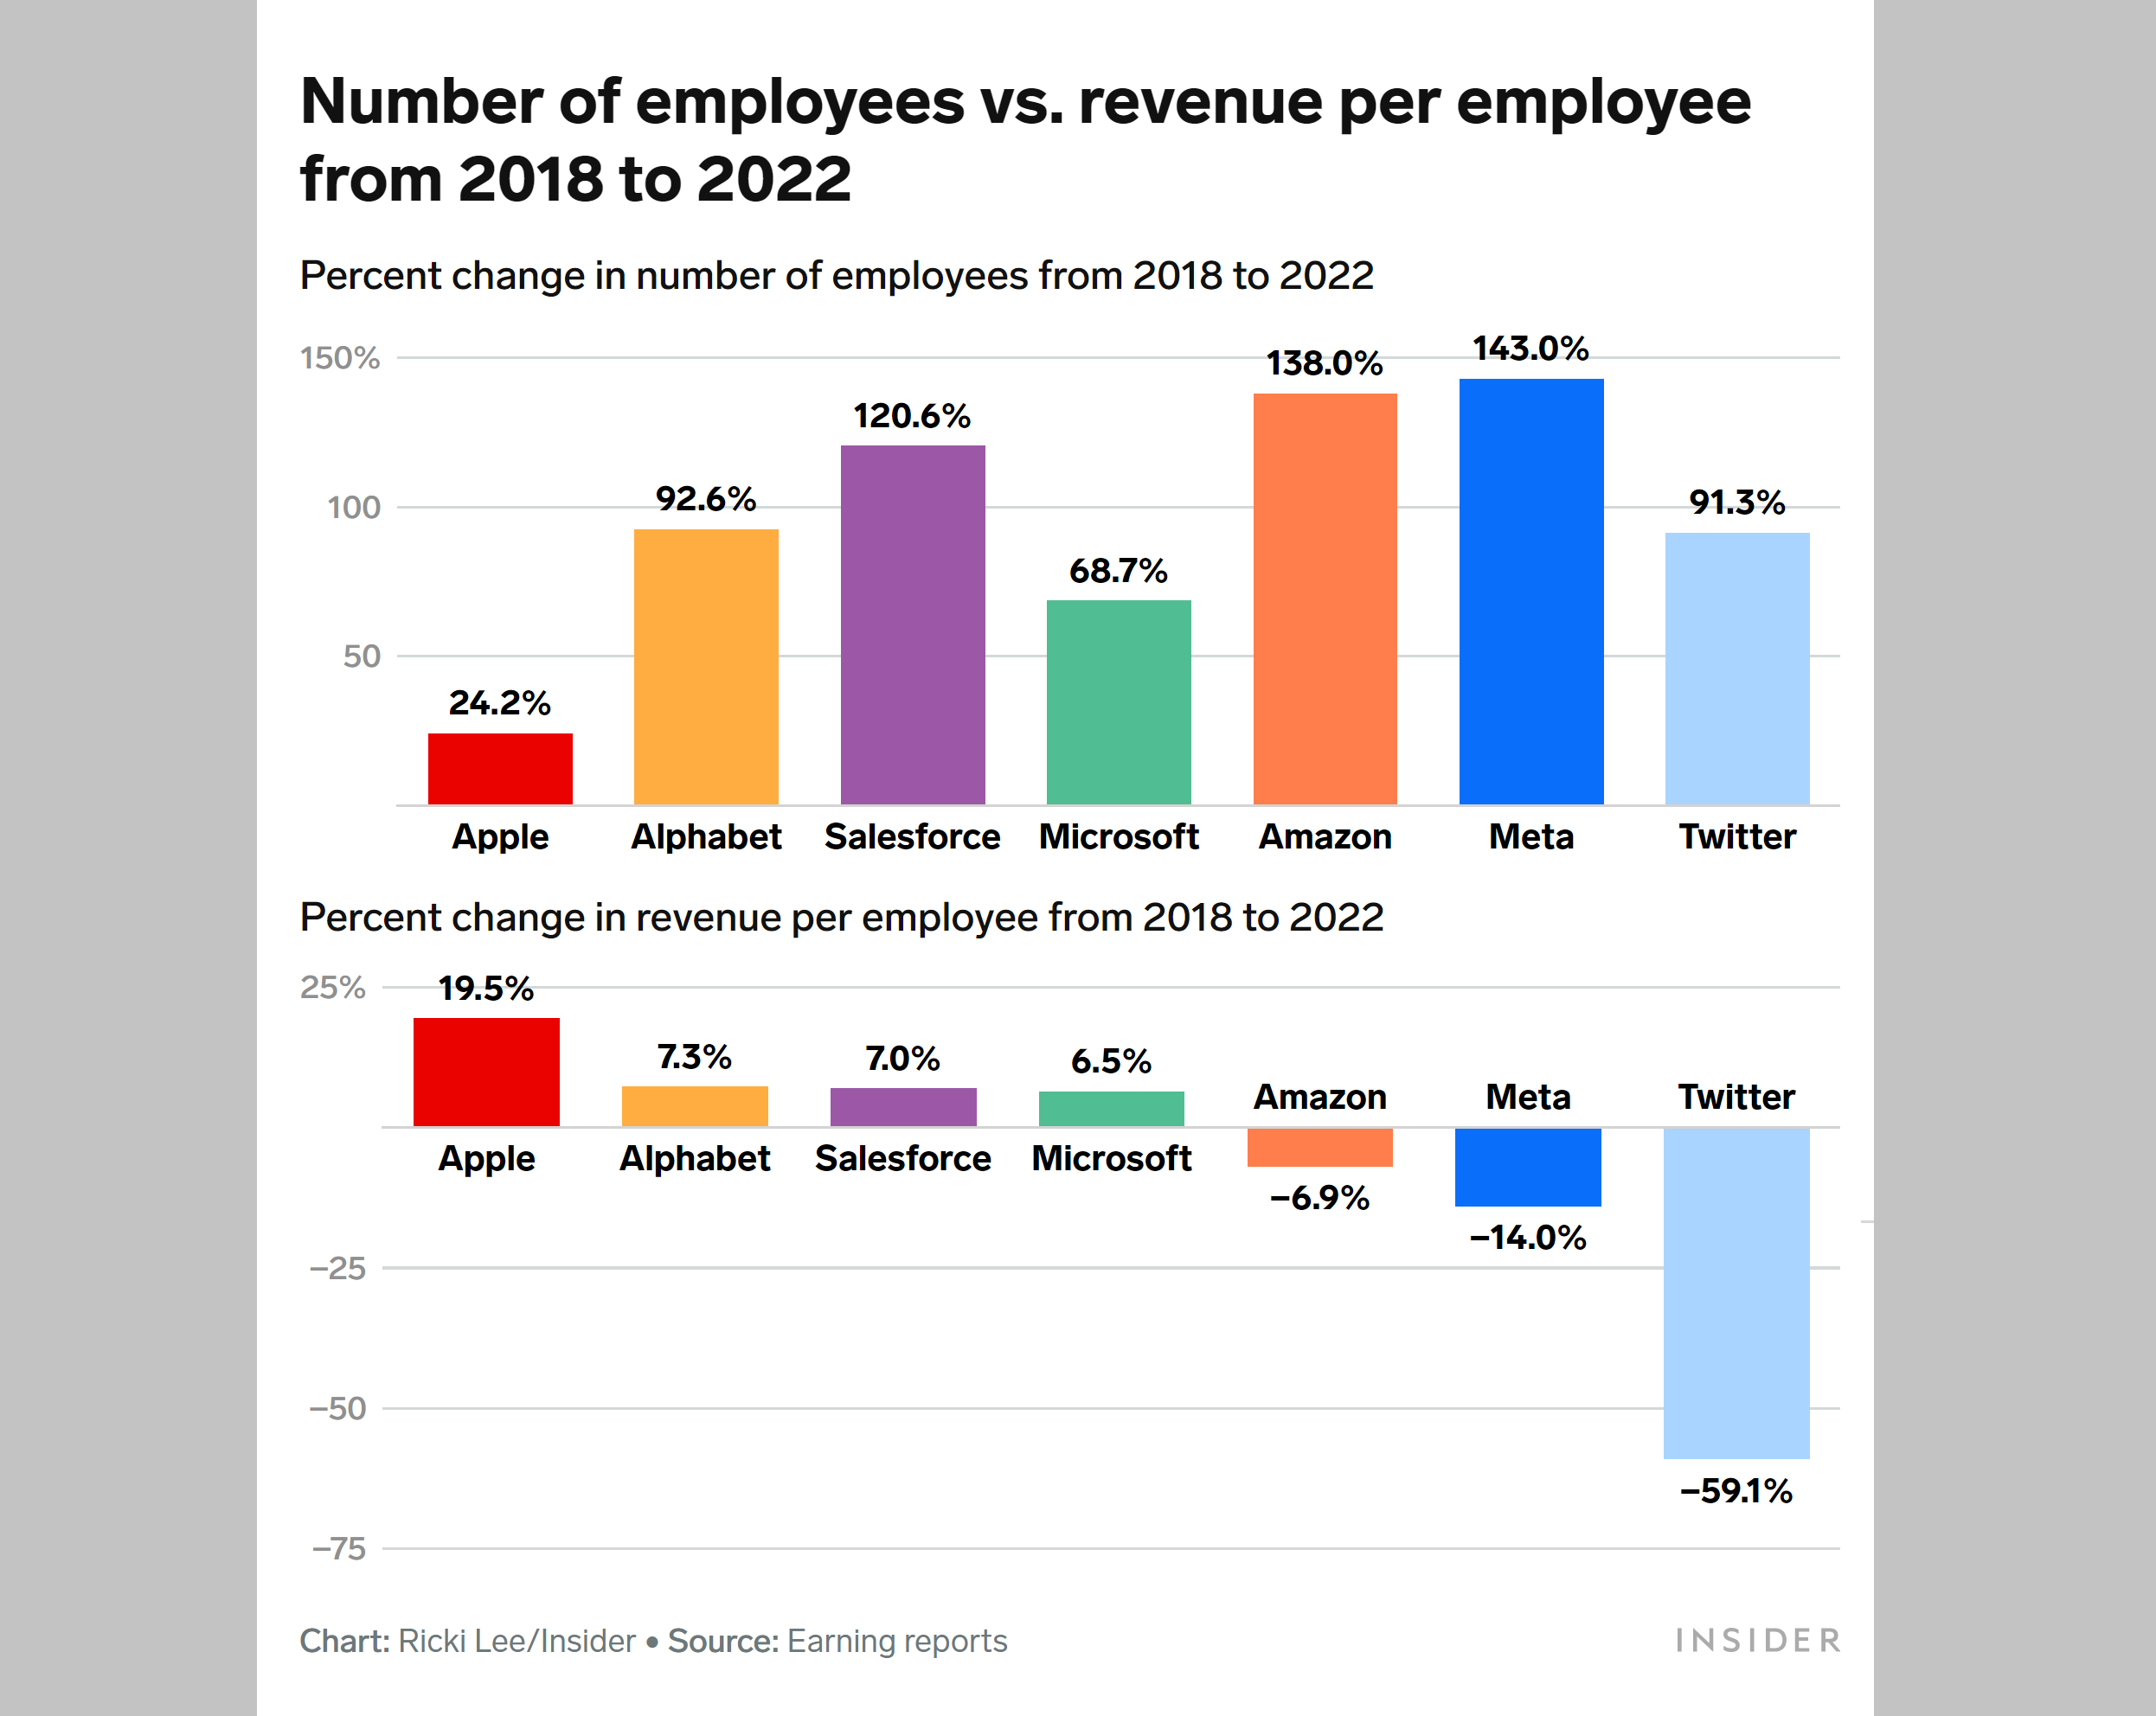 The correlation between number of employees and revenue per employee in big tech companies from 2018 to 2022